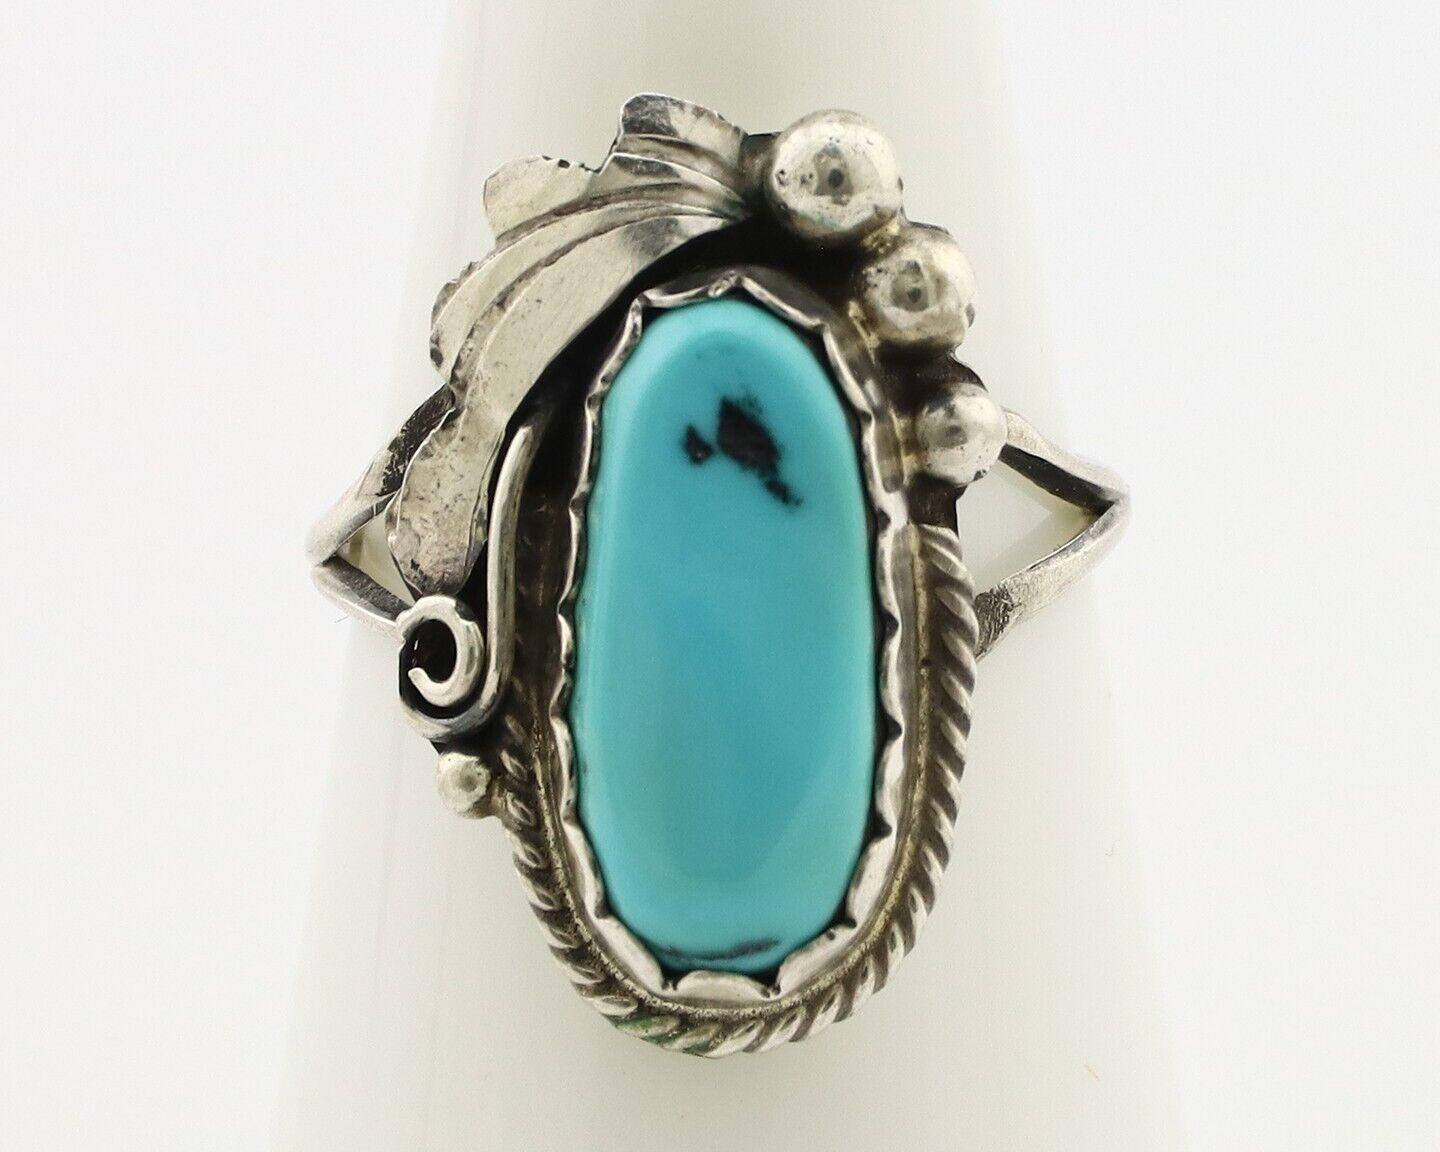 Navajo Inlaid Ring 925 Silver Blue Turquoise Artist Signed Justin Morris C.80s